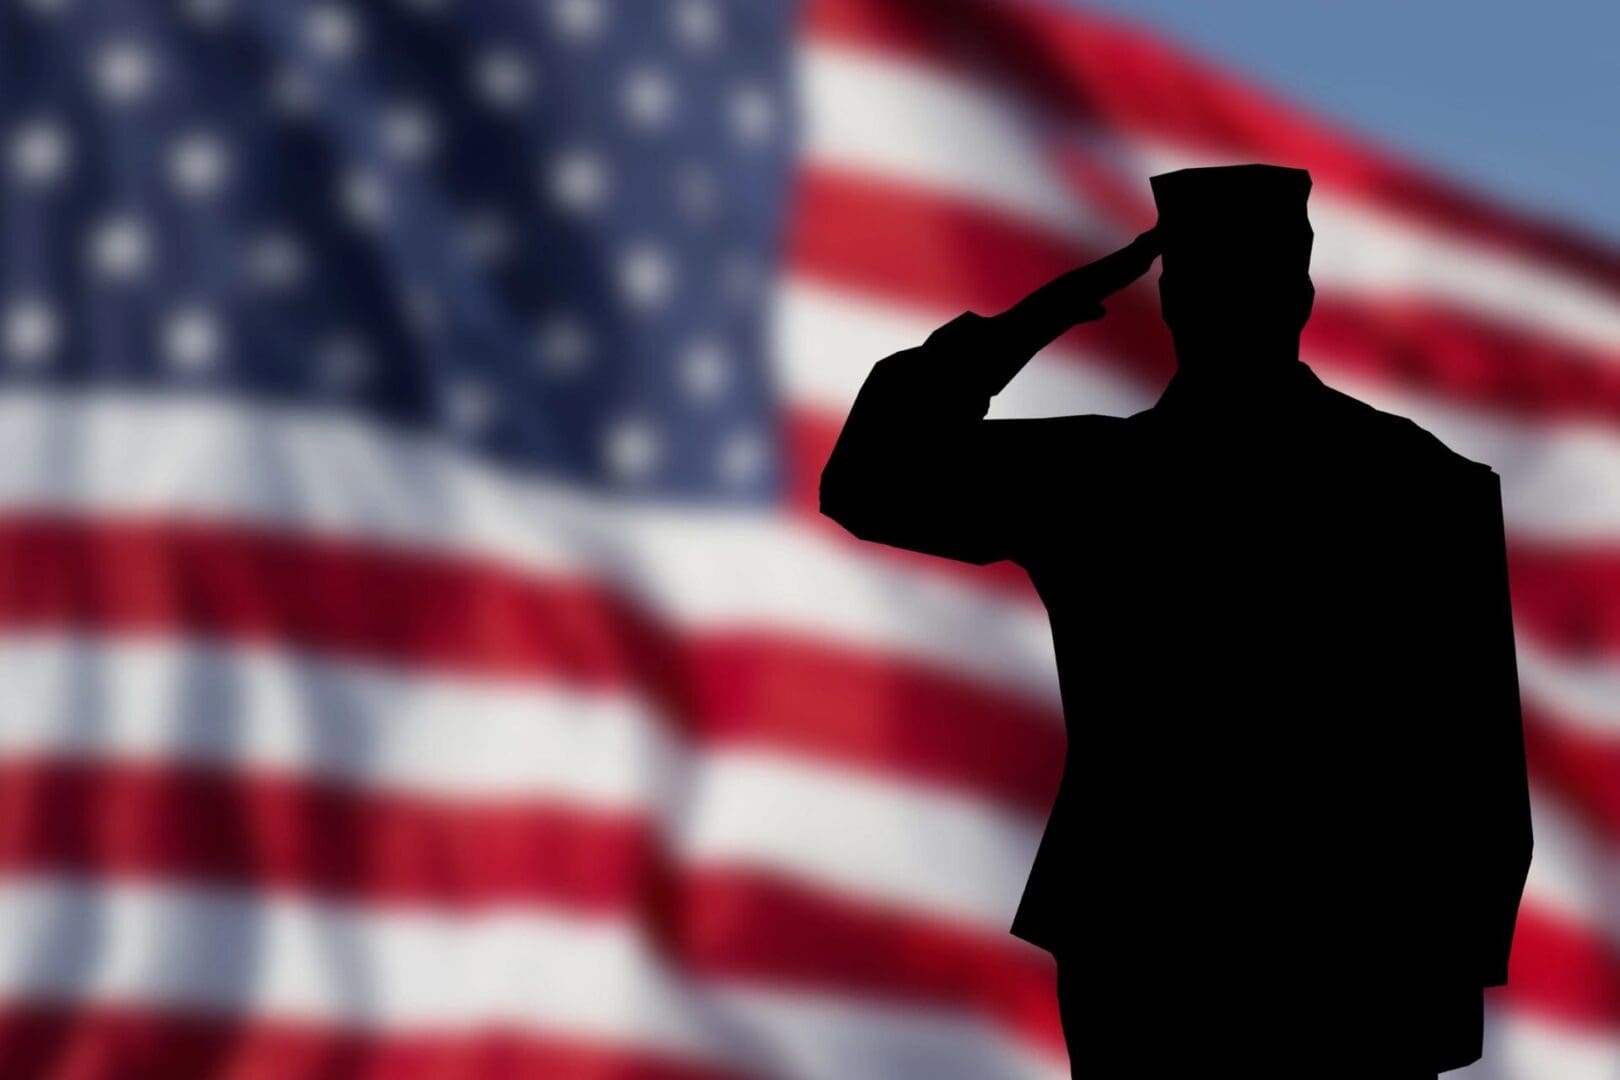 A soldier saluting in front of an american flag.